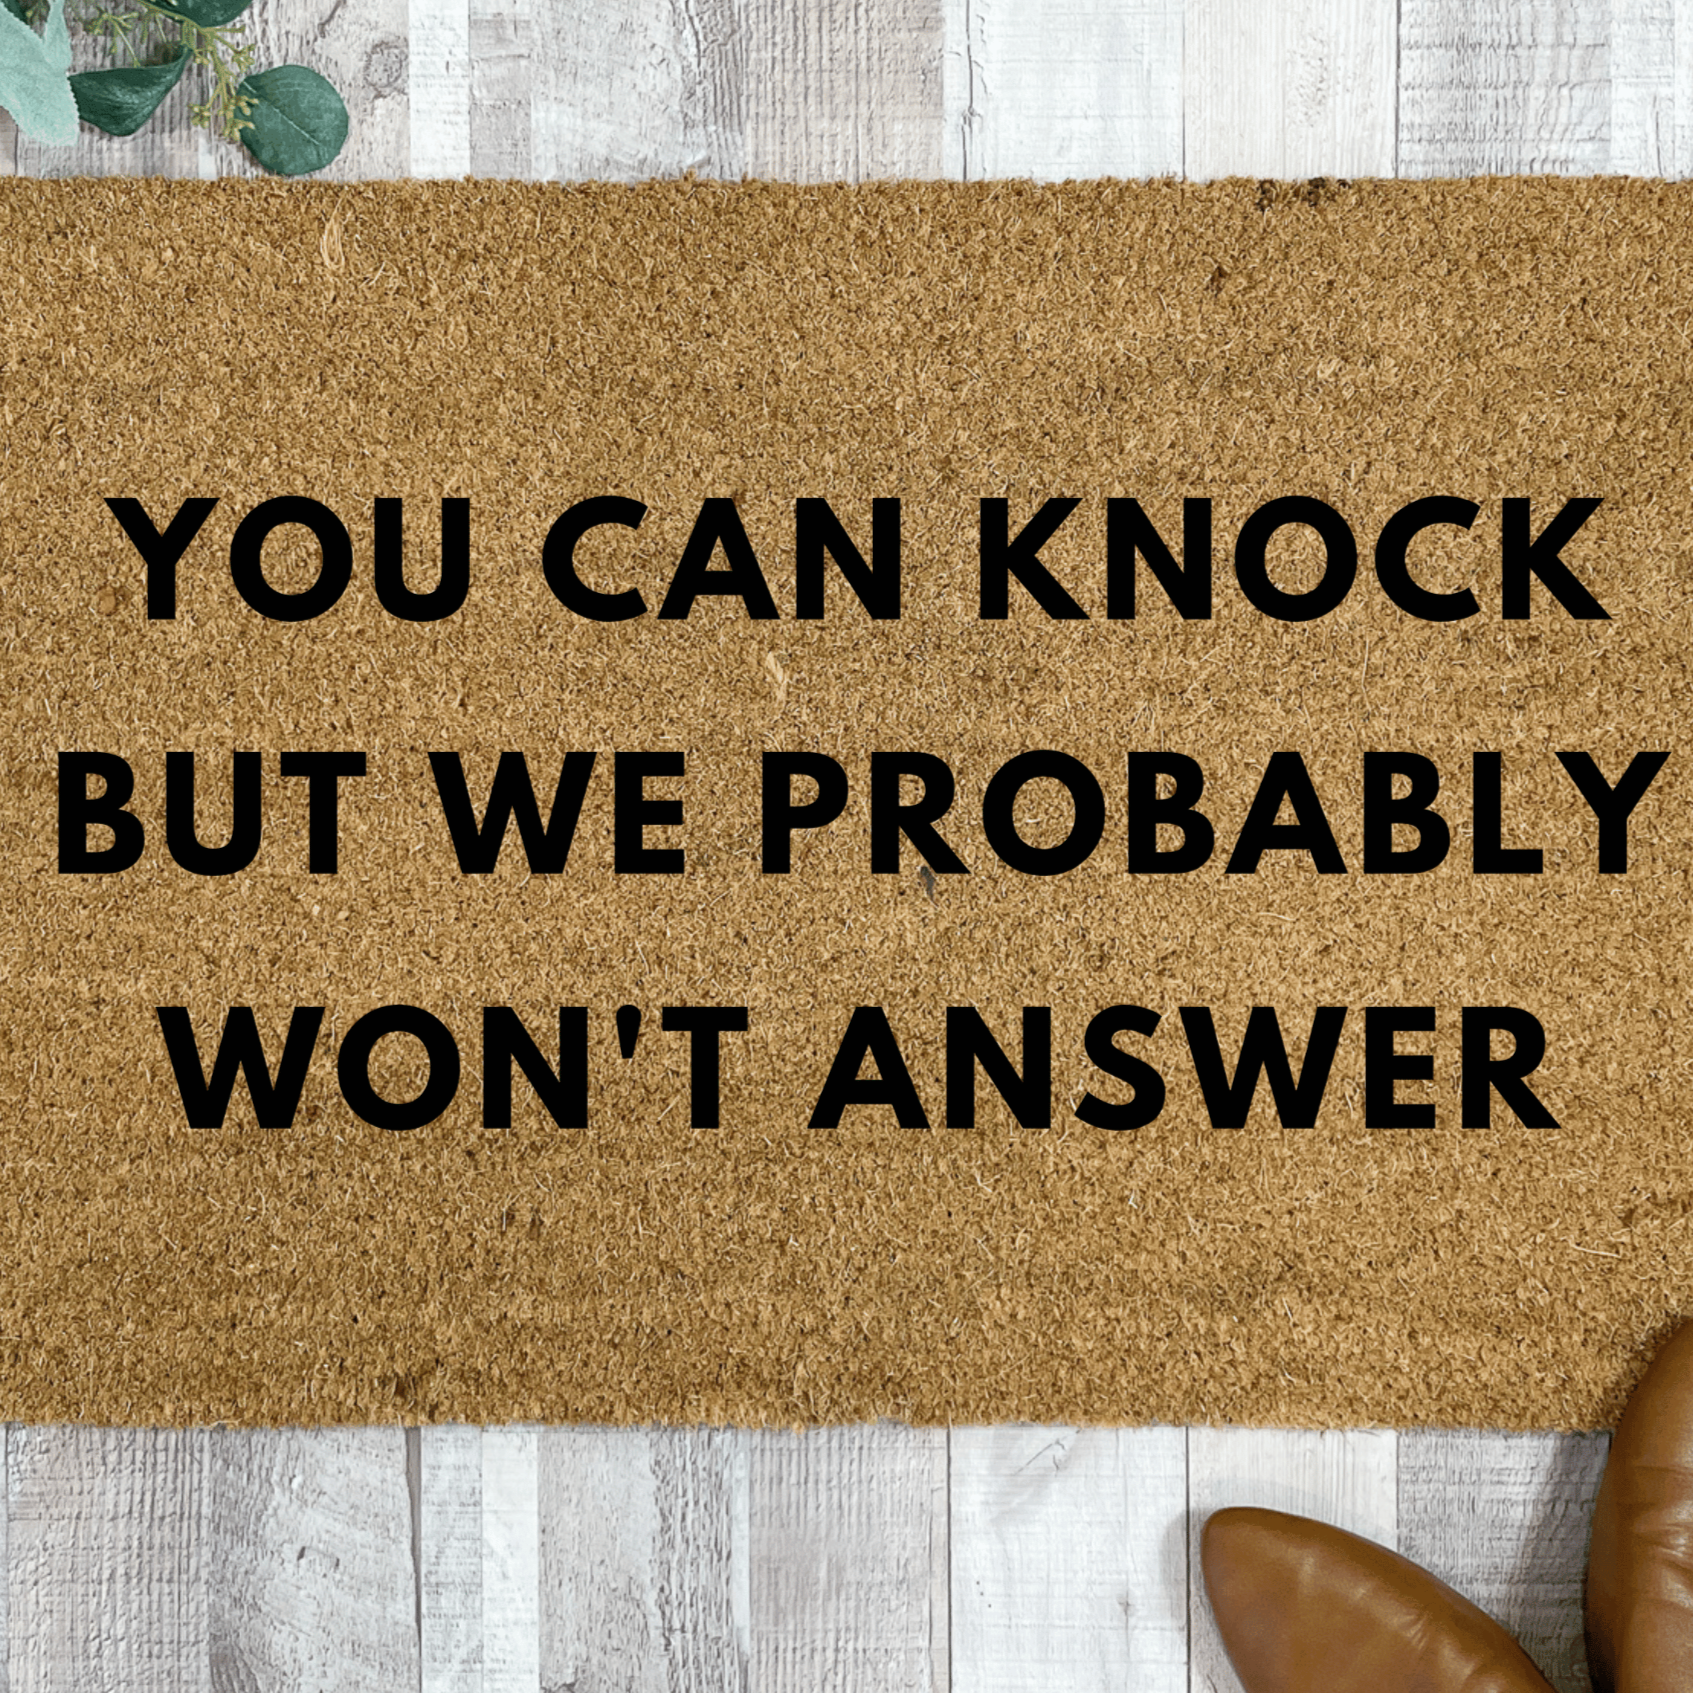 You Can Knock But We Probably Won't Answer Doormat